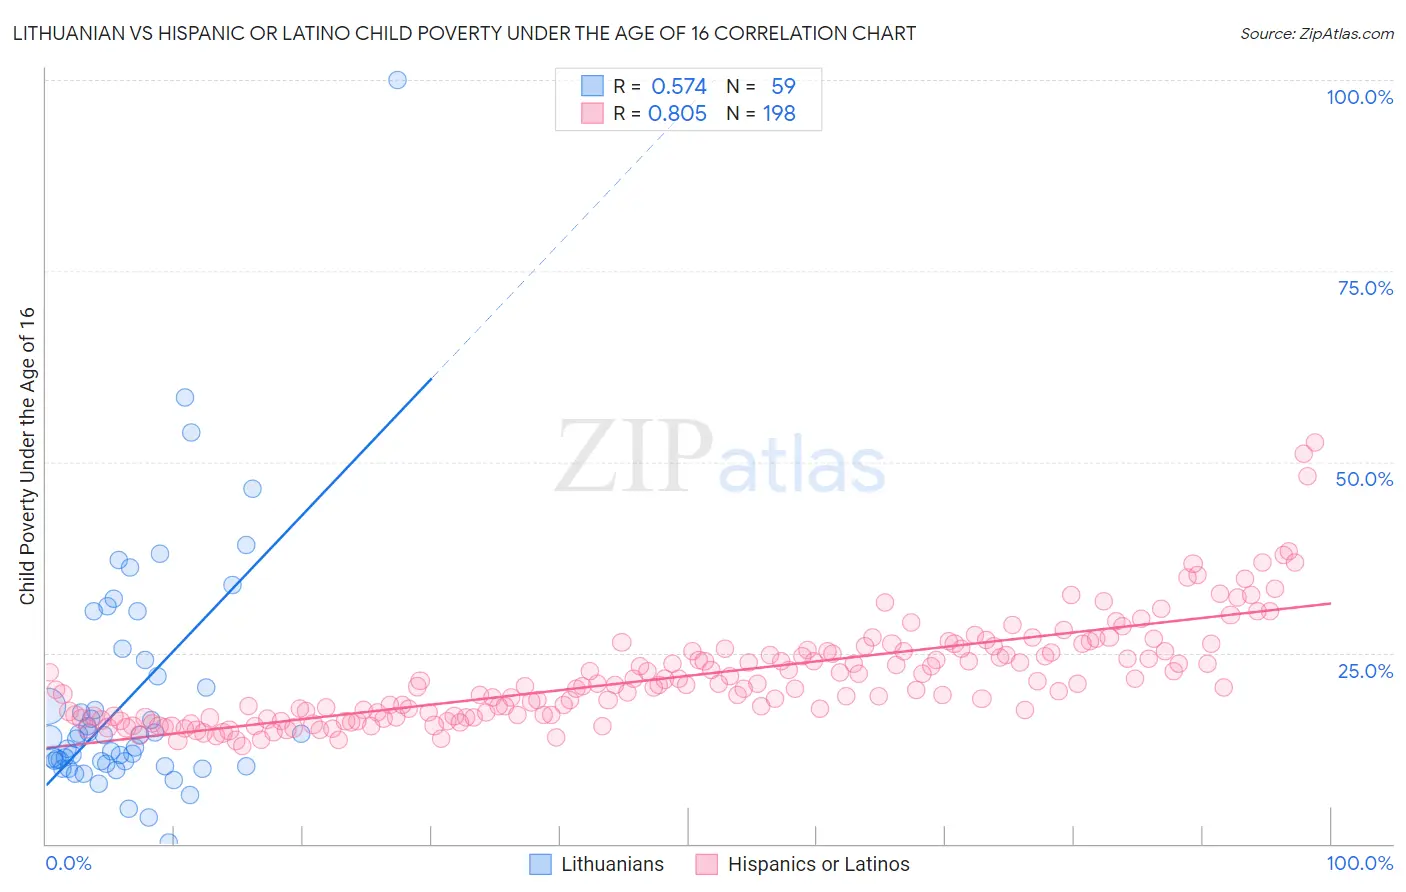 Lithuanian vs Hispanic or Latino Child Poverty Under the Age of 16